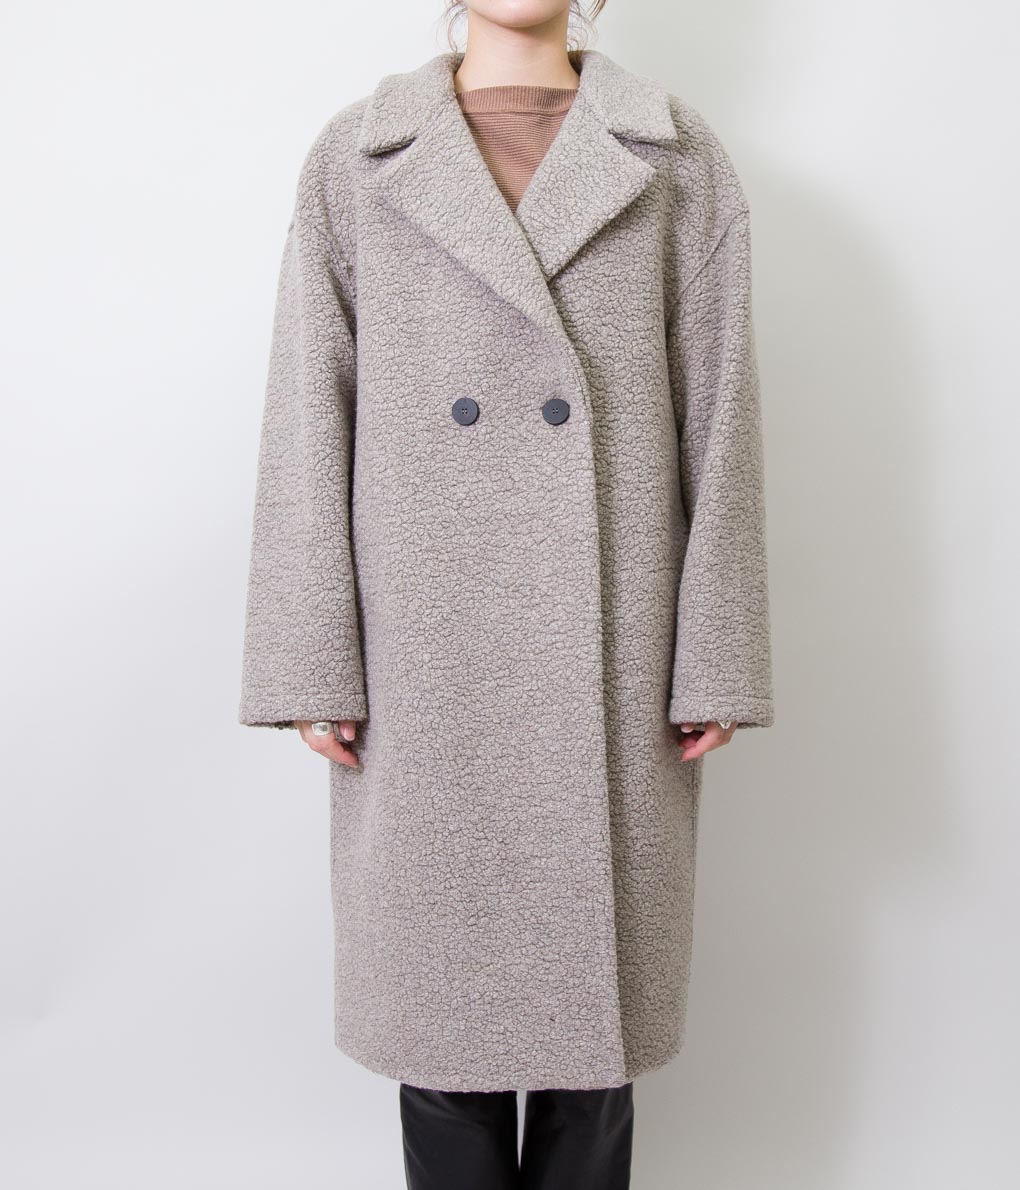 New Arrival “HARRIS WHARF LONDON” | well-made by MAIDENS SHOP